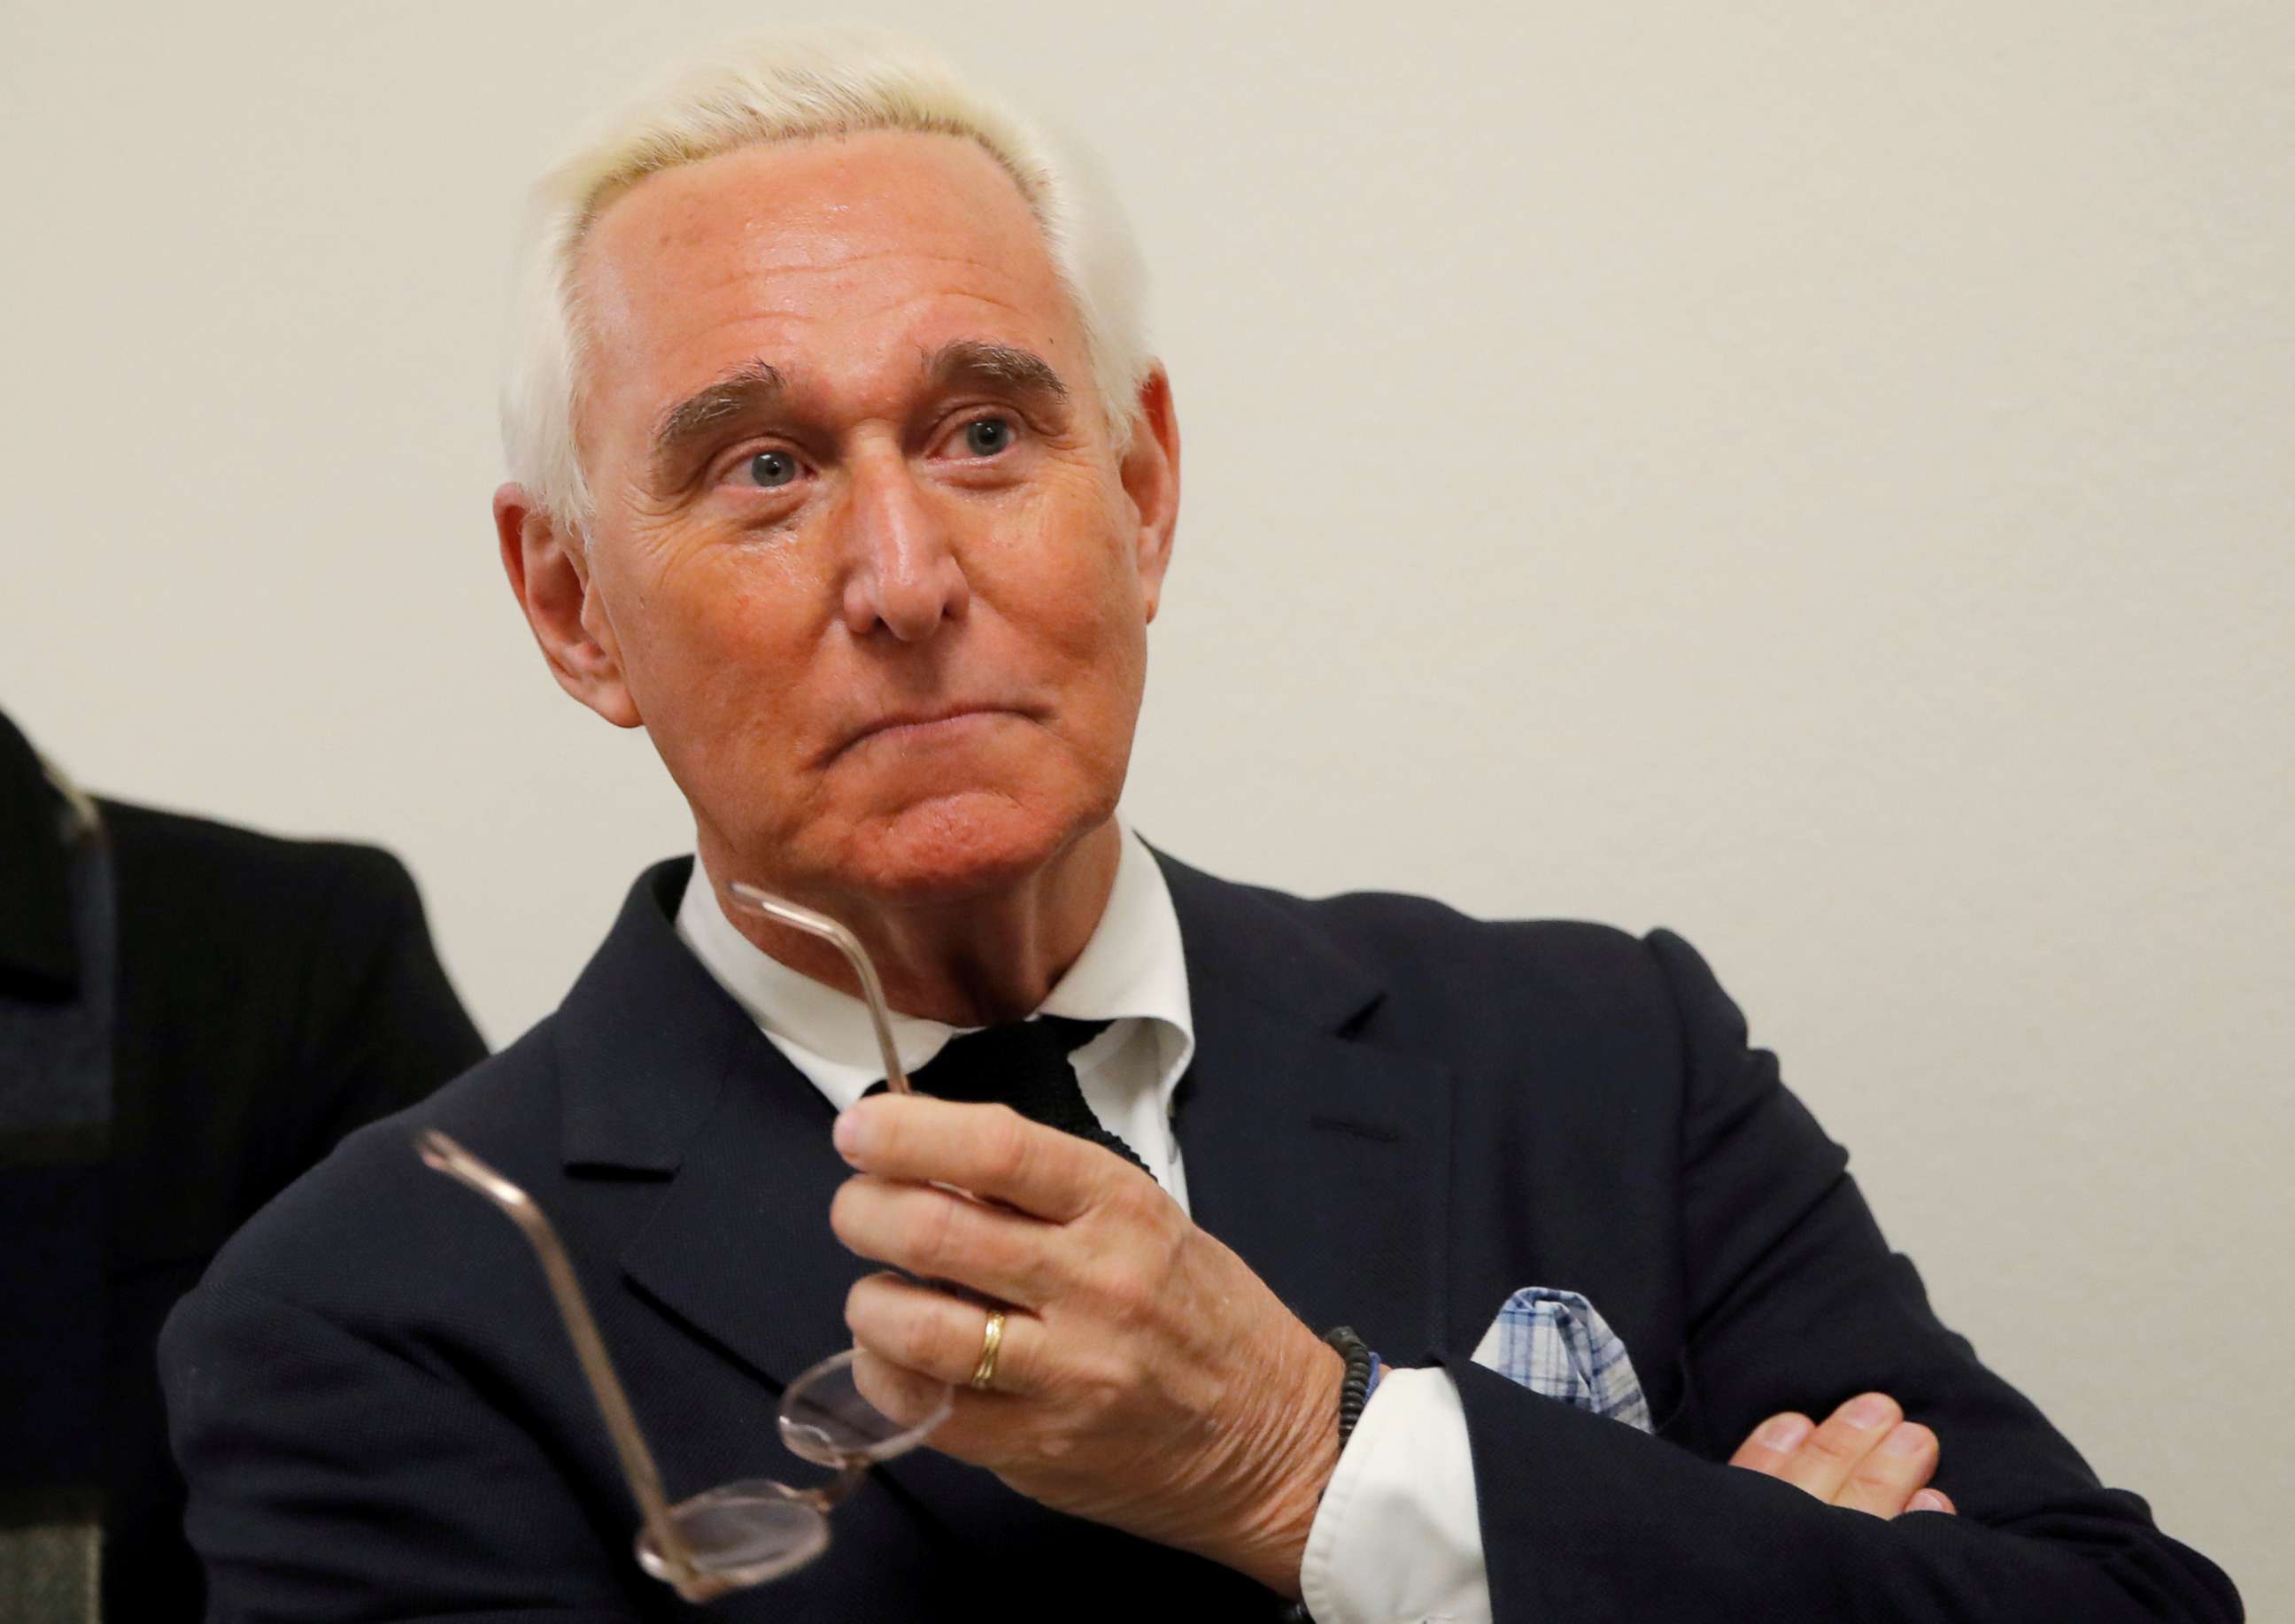 PHOTO: Political operative Roger Stone attends a House Judiciary Committee hearing in Washington, Dec. 11, 2018.